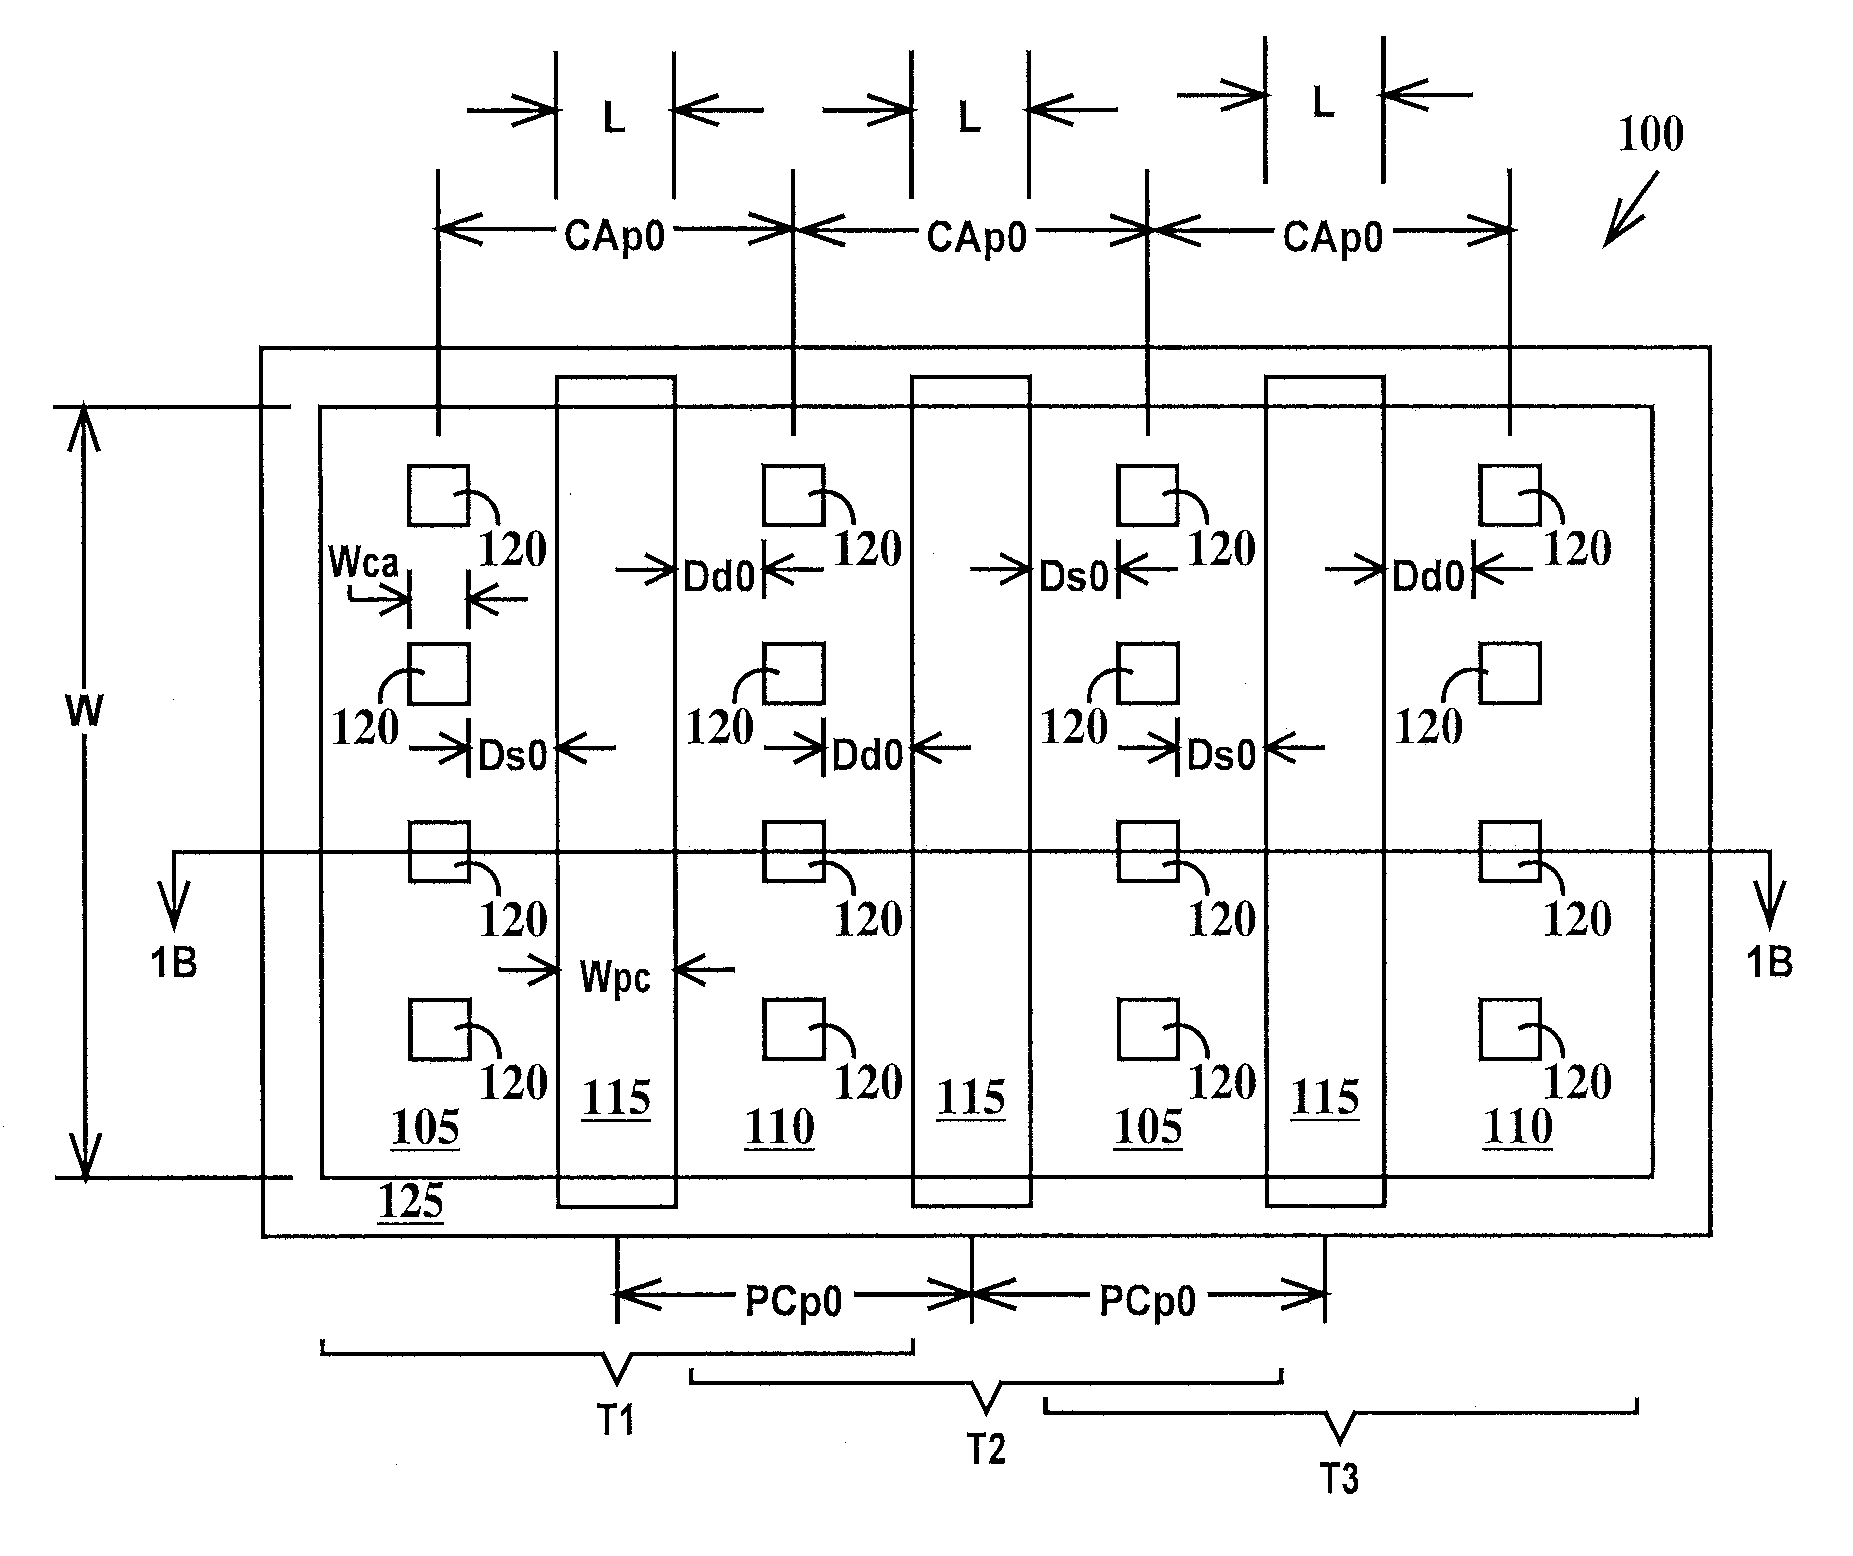 High-performance fet device layout